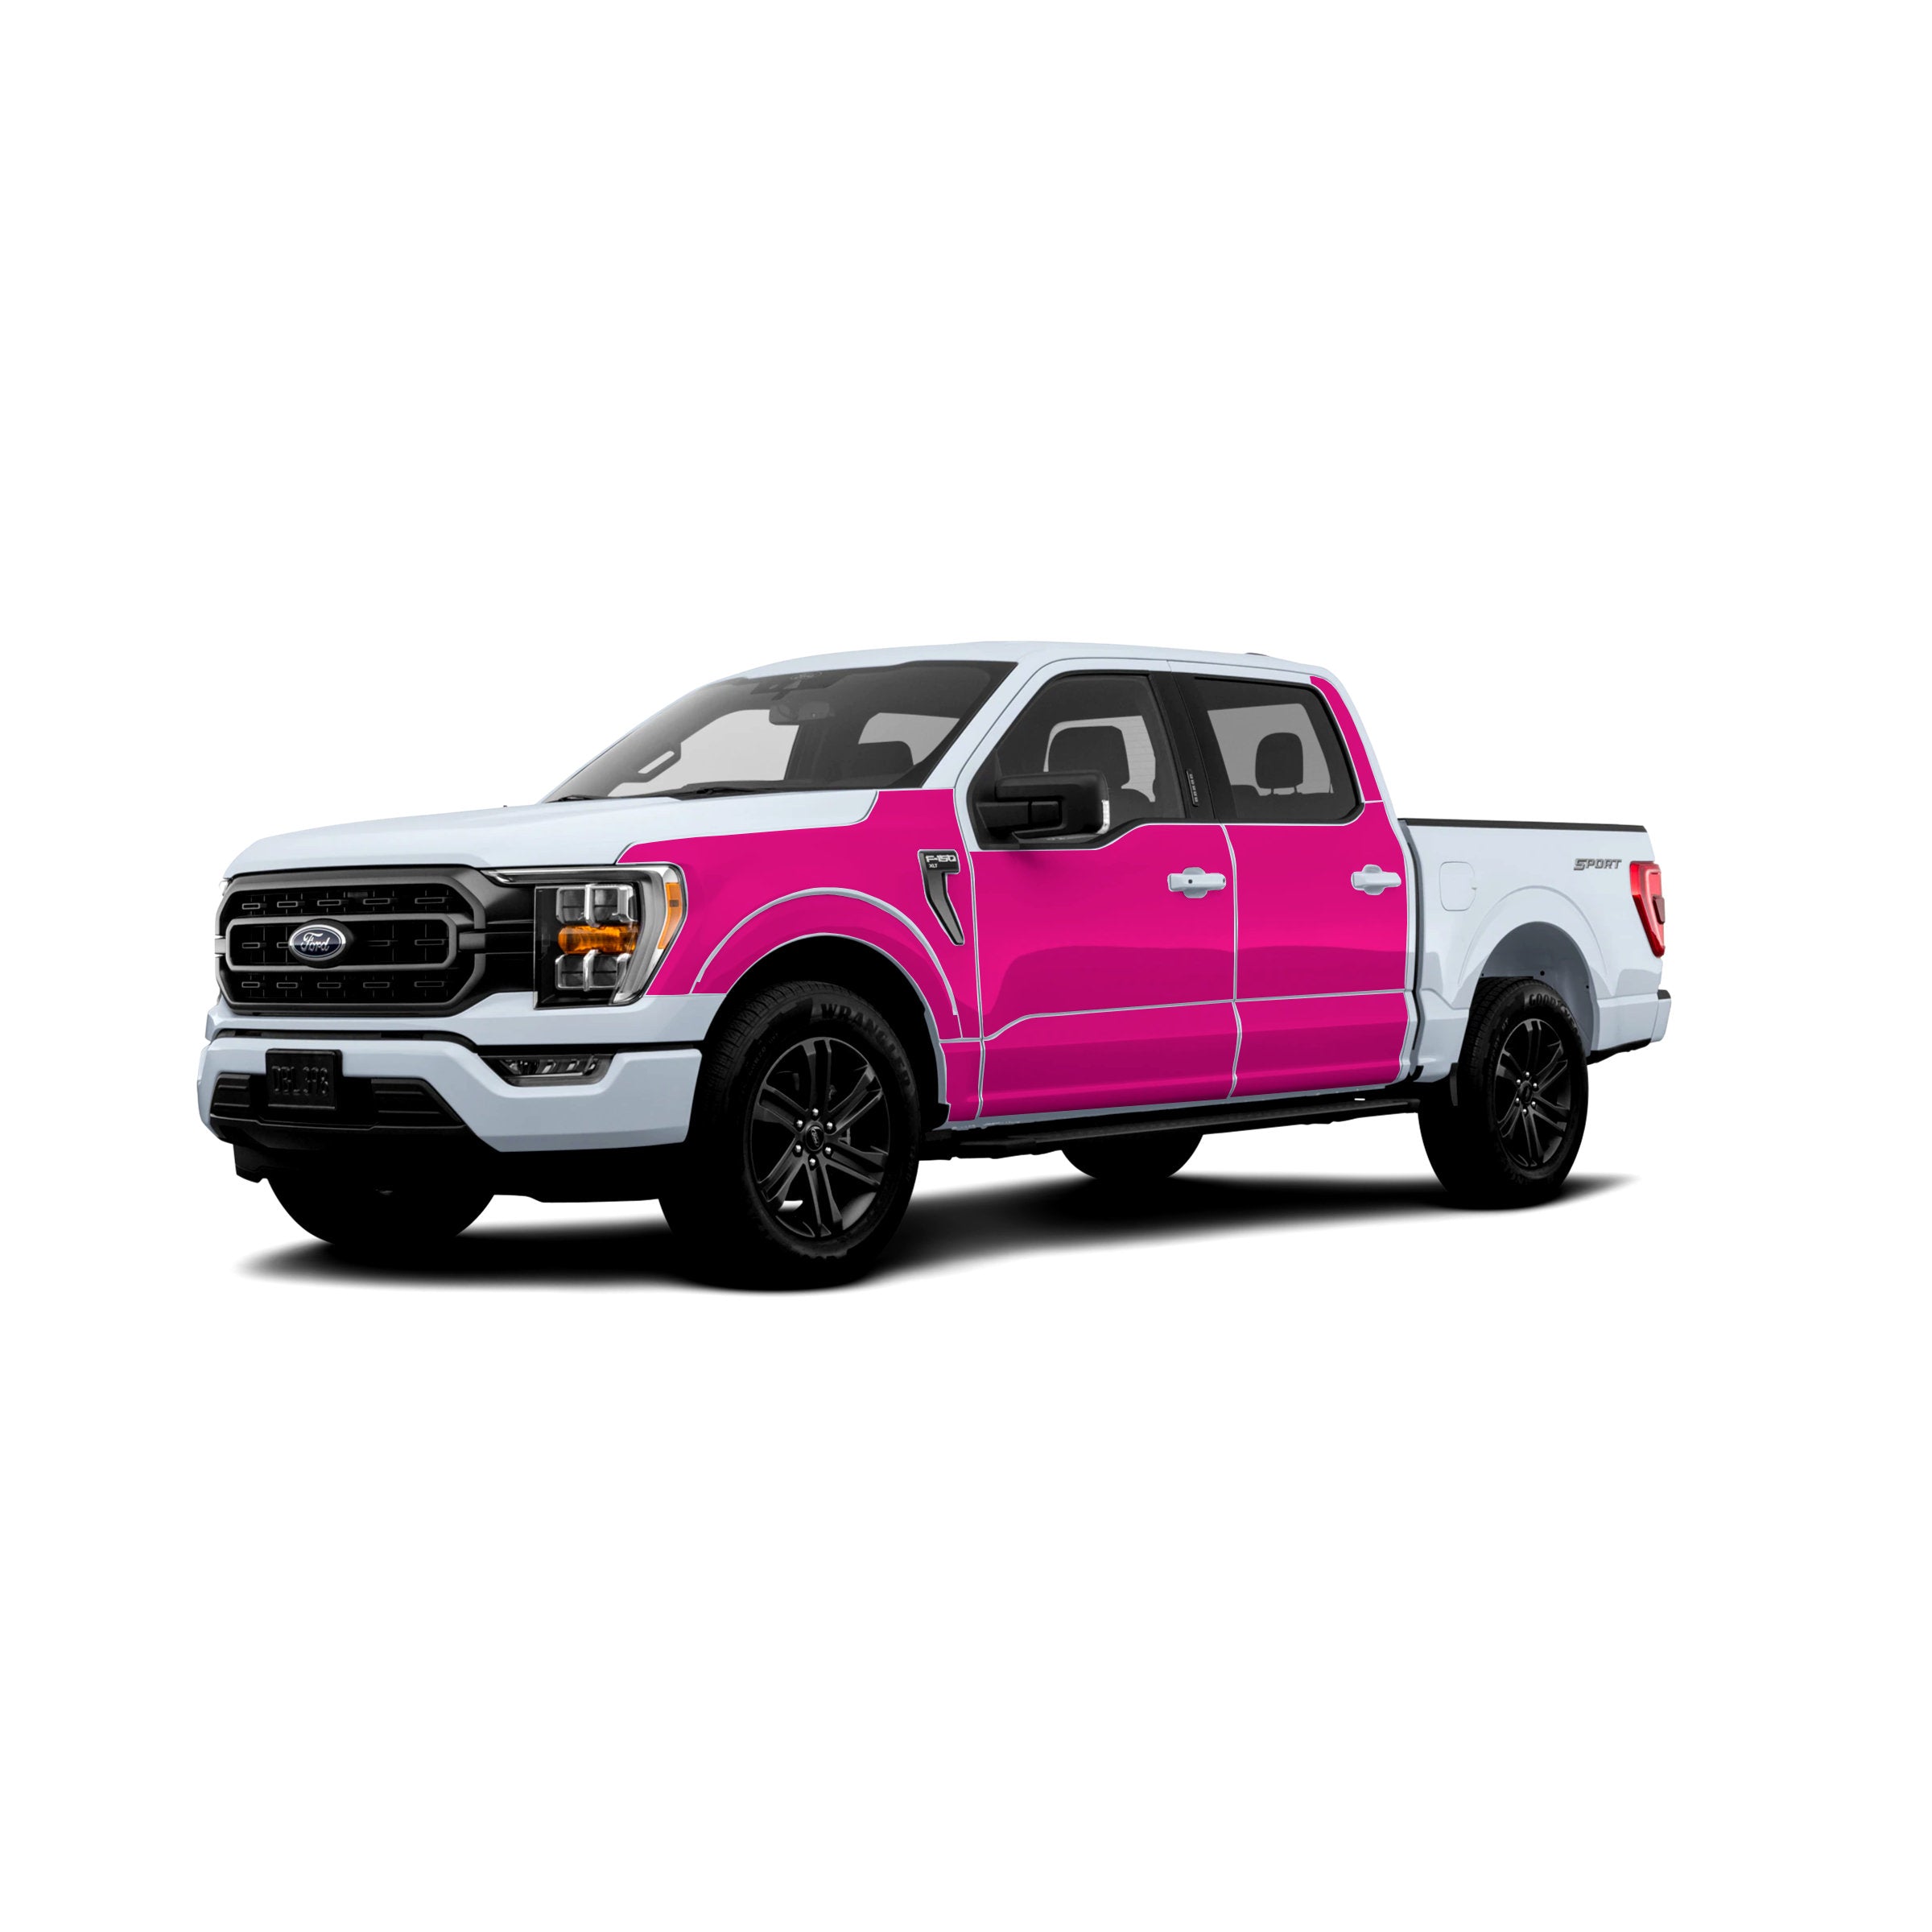 Bushwrapz DIY Paint Protection Film (PPF) Kit - To Suit Ford F150 - Cab only